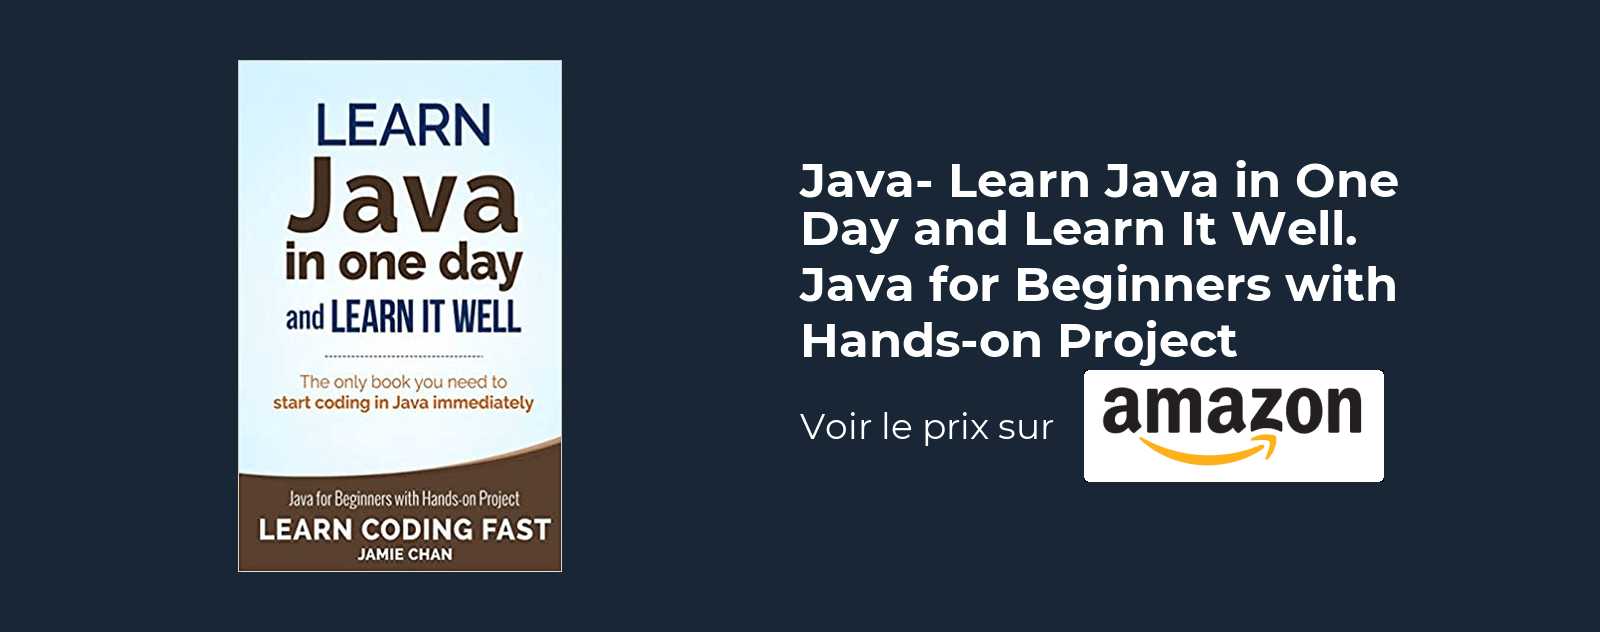 Java- Learn Java in One Day and Learn It Well. Java for Beginners with Hands-on Project